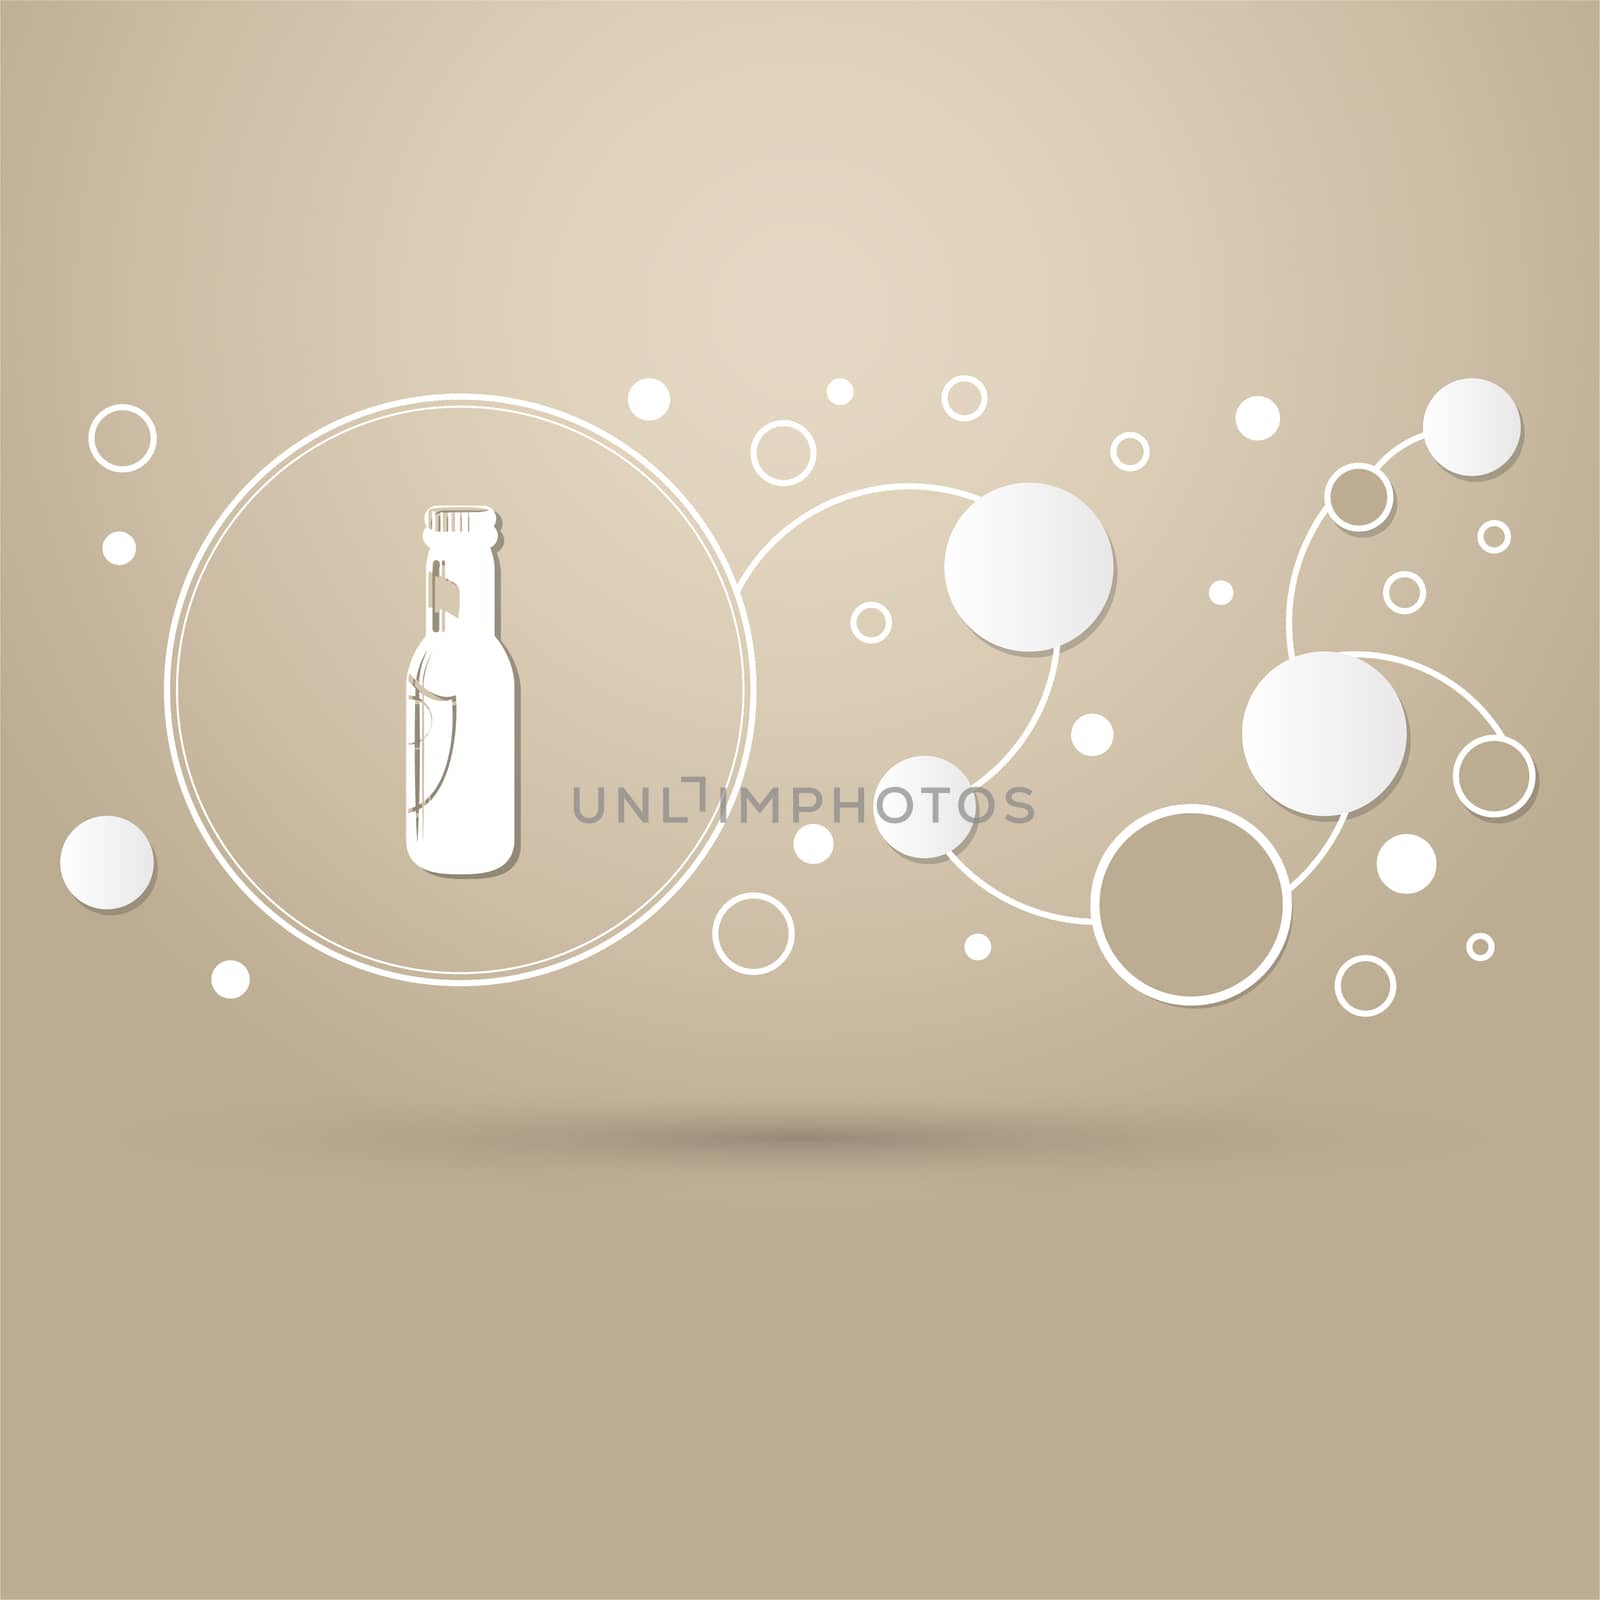 Beer bottle Icon on a brown background with elegant style and modern design infographic.  by Adamchuk